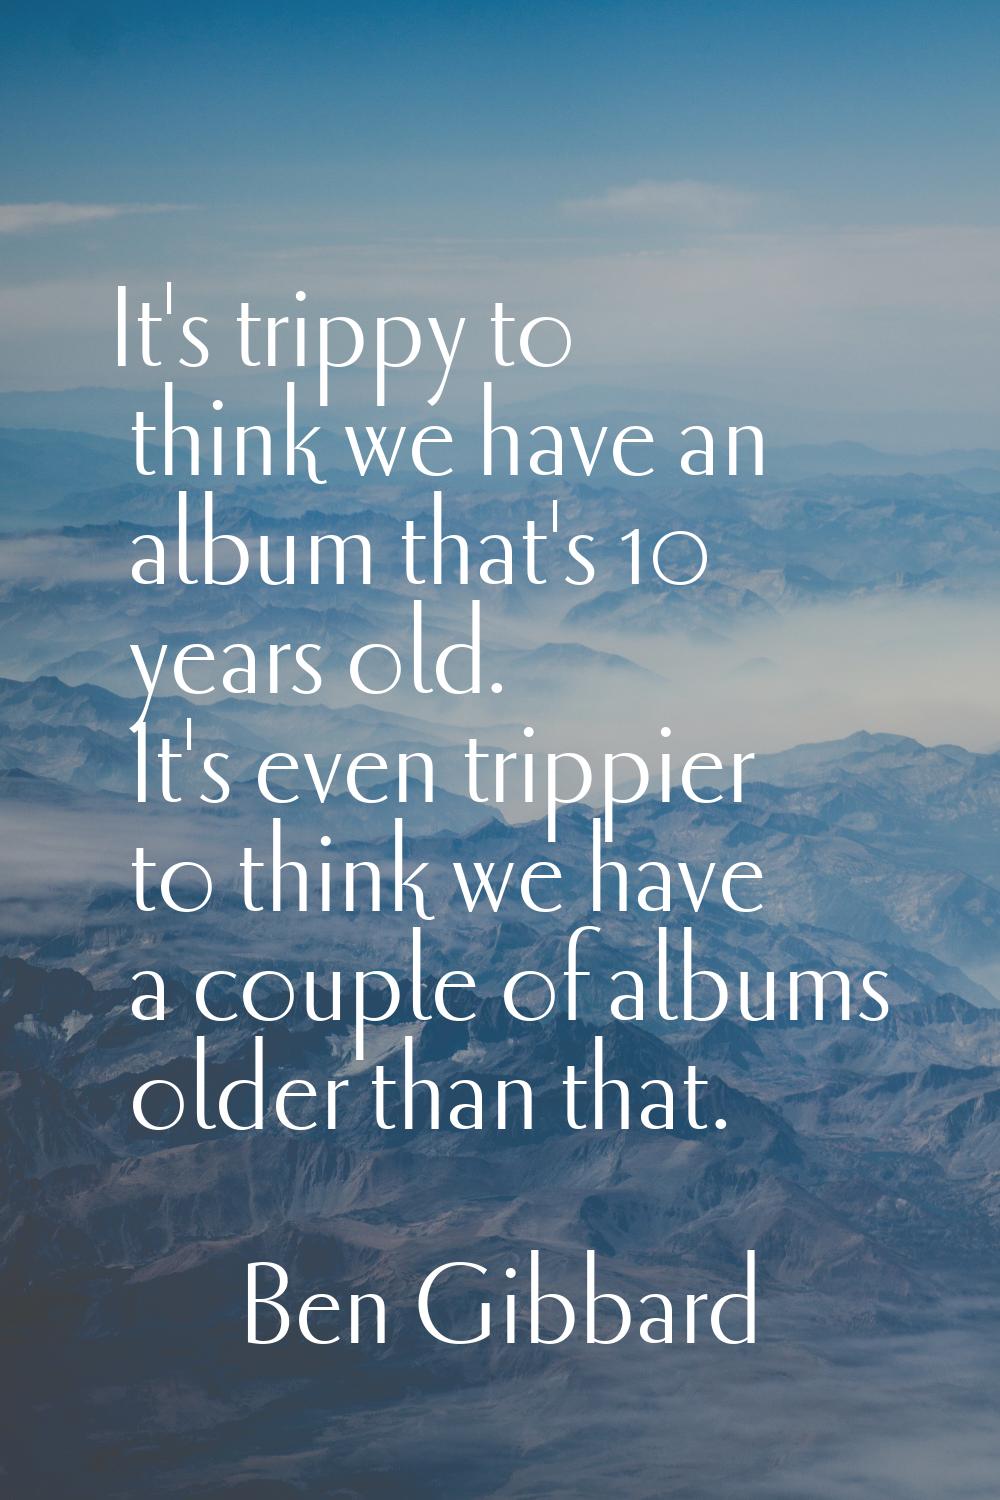 It's trippy to think we have an album that's 10 years old. It's even trippier to think we have a co